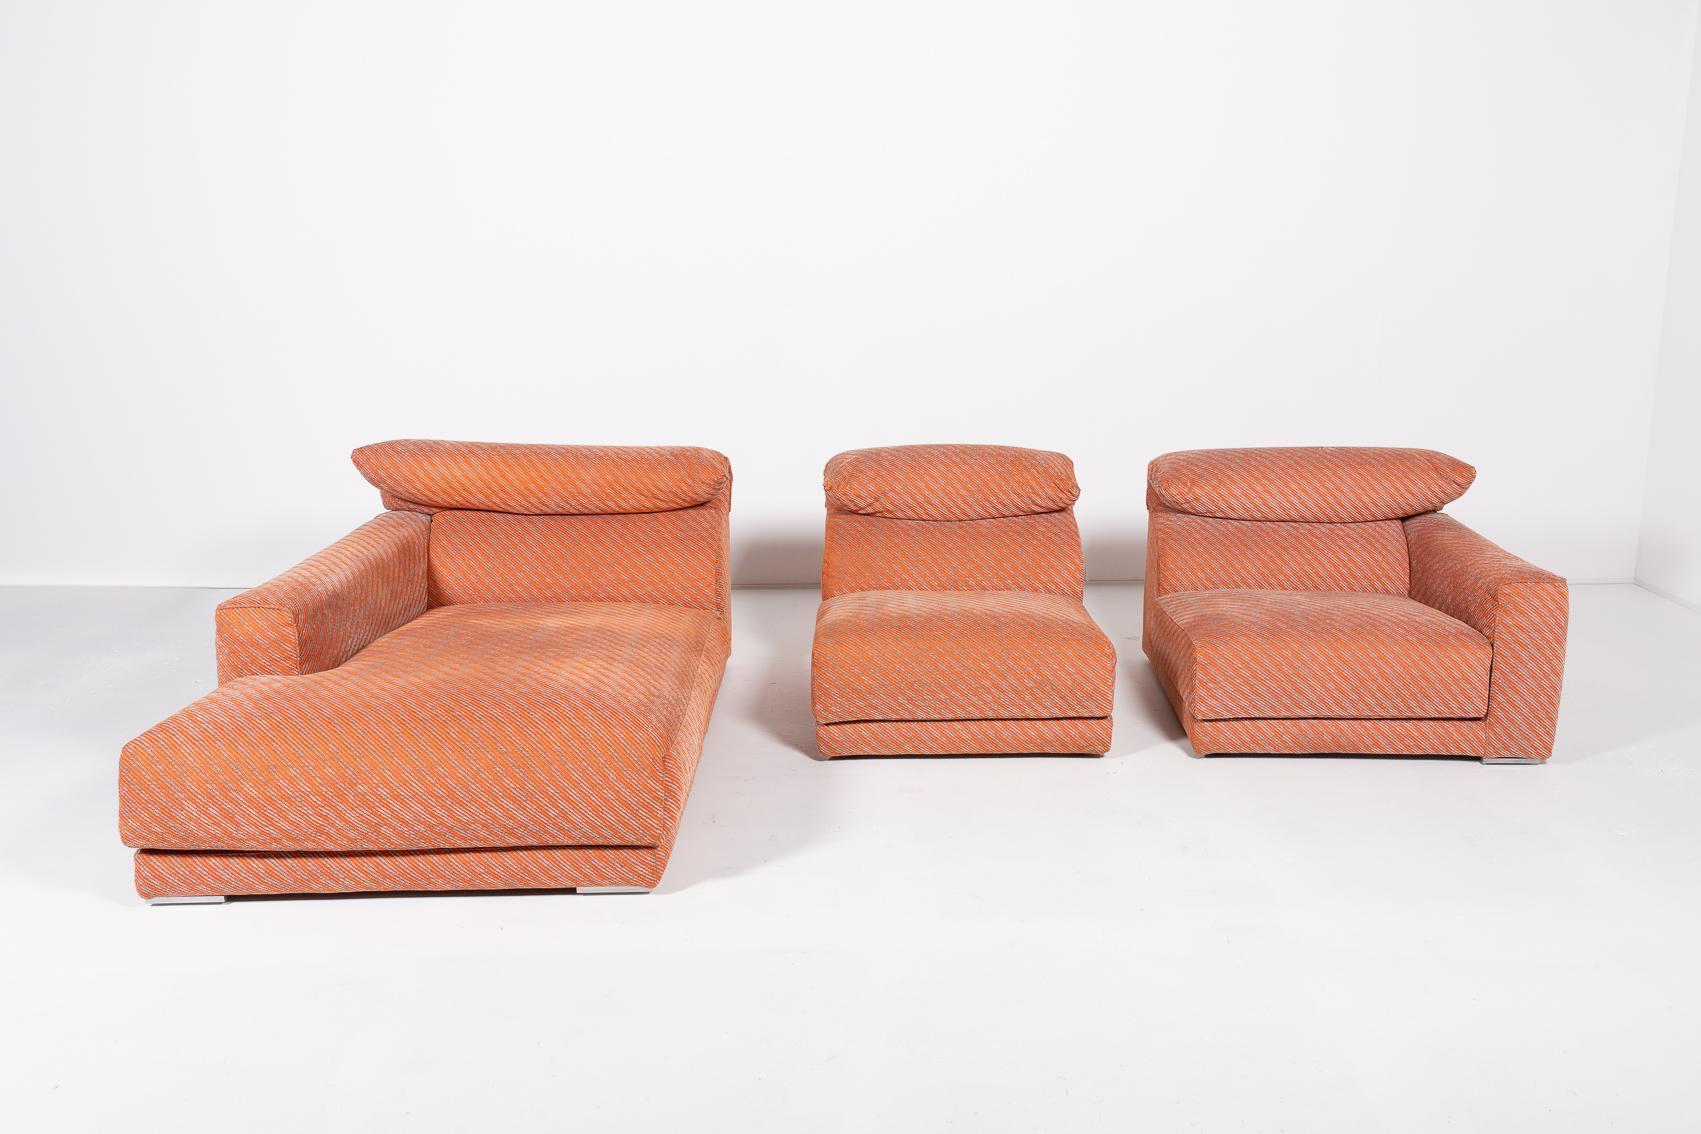 Beautiful modular seats from well known Roche Bobois. Wonderful original striped fabric upholstery, adjustable backrest/headrest. Consisting of 3 sections, possible configurations as loose seats or sofa.

Condition
Good, usage marks

Element